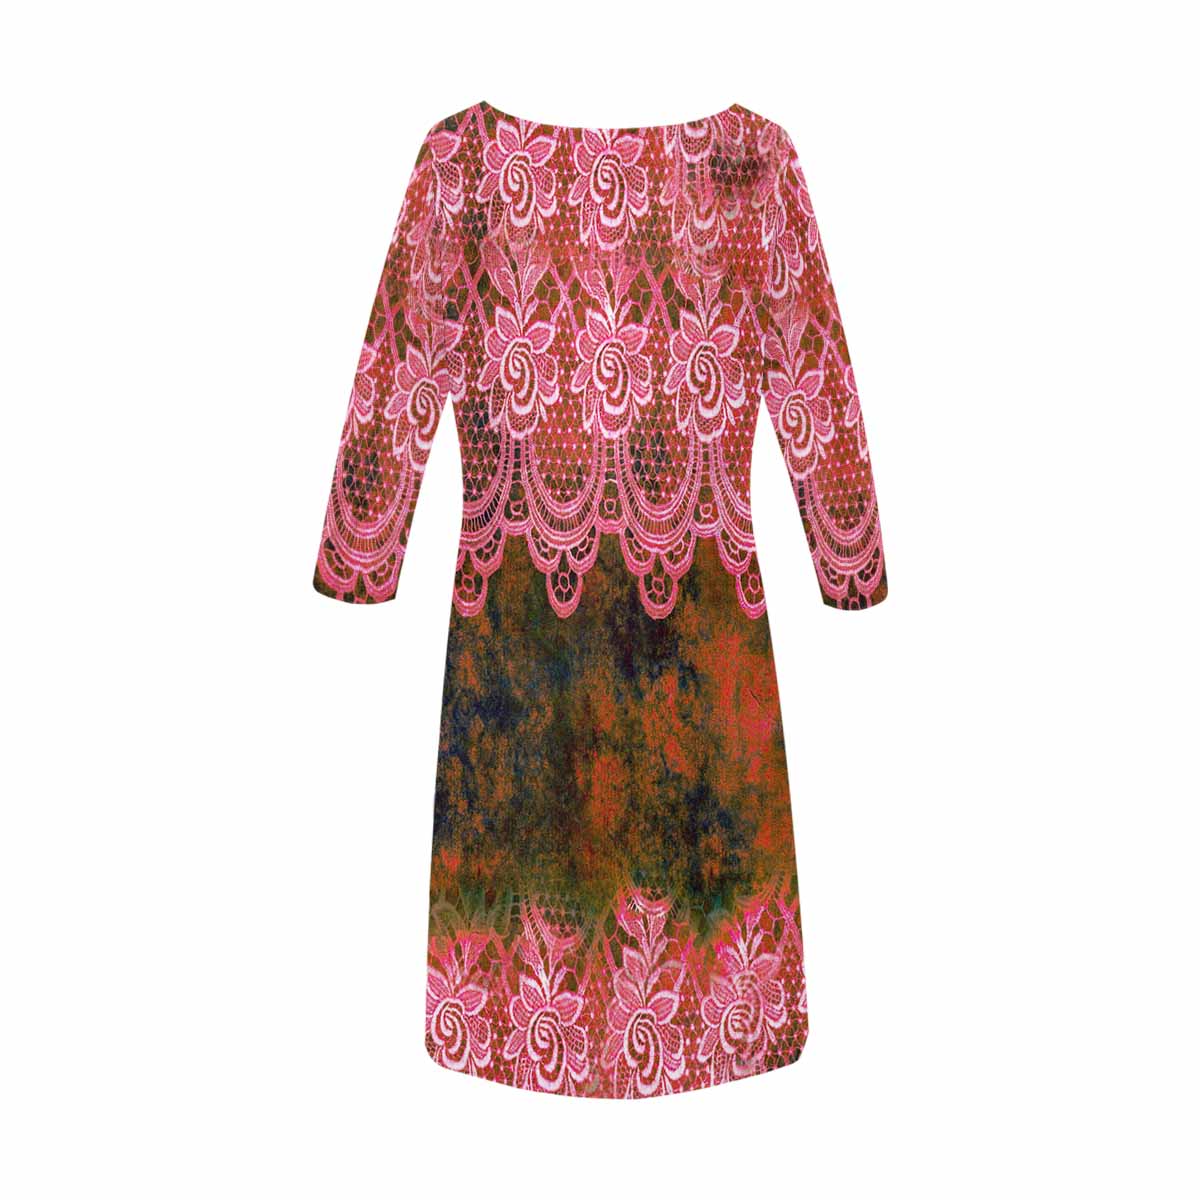 Victorian printed lace loose dress, Design 32